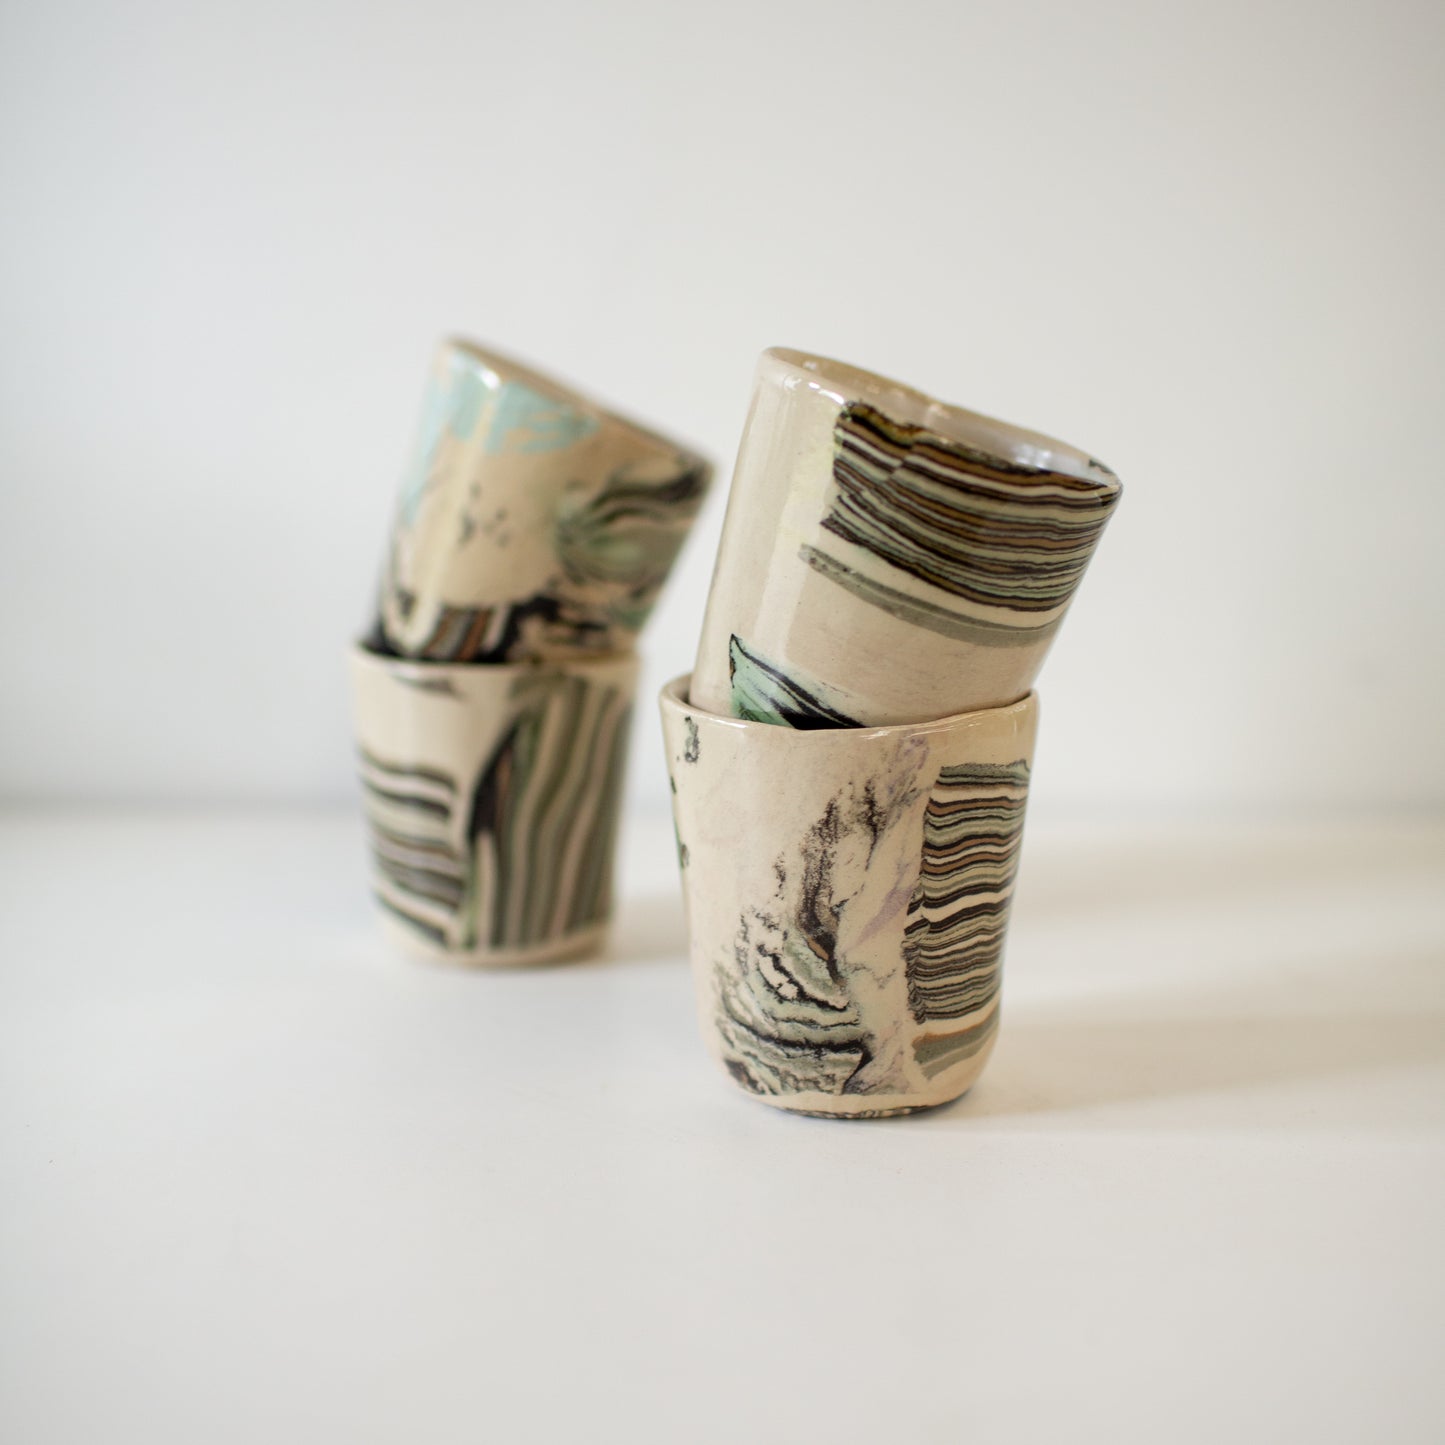 ‘Up the Cliff’ tumblers